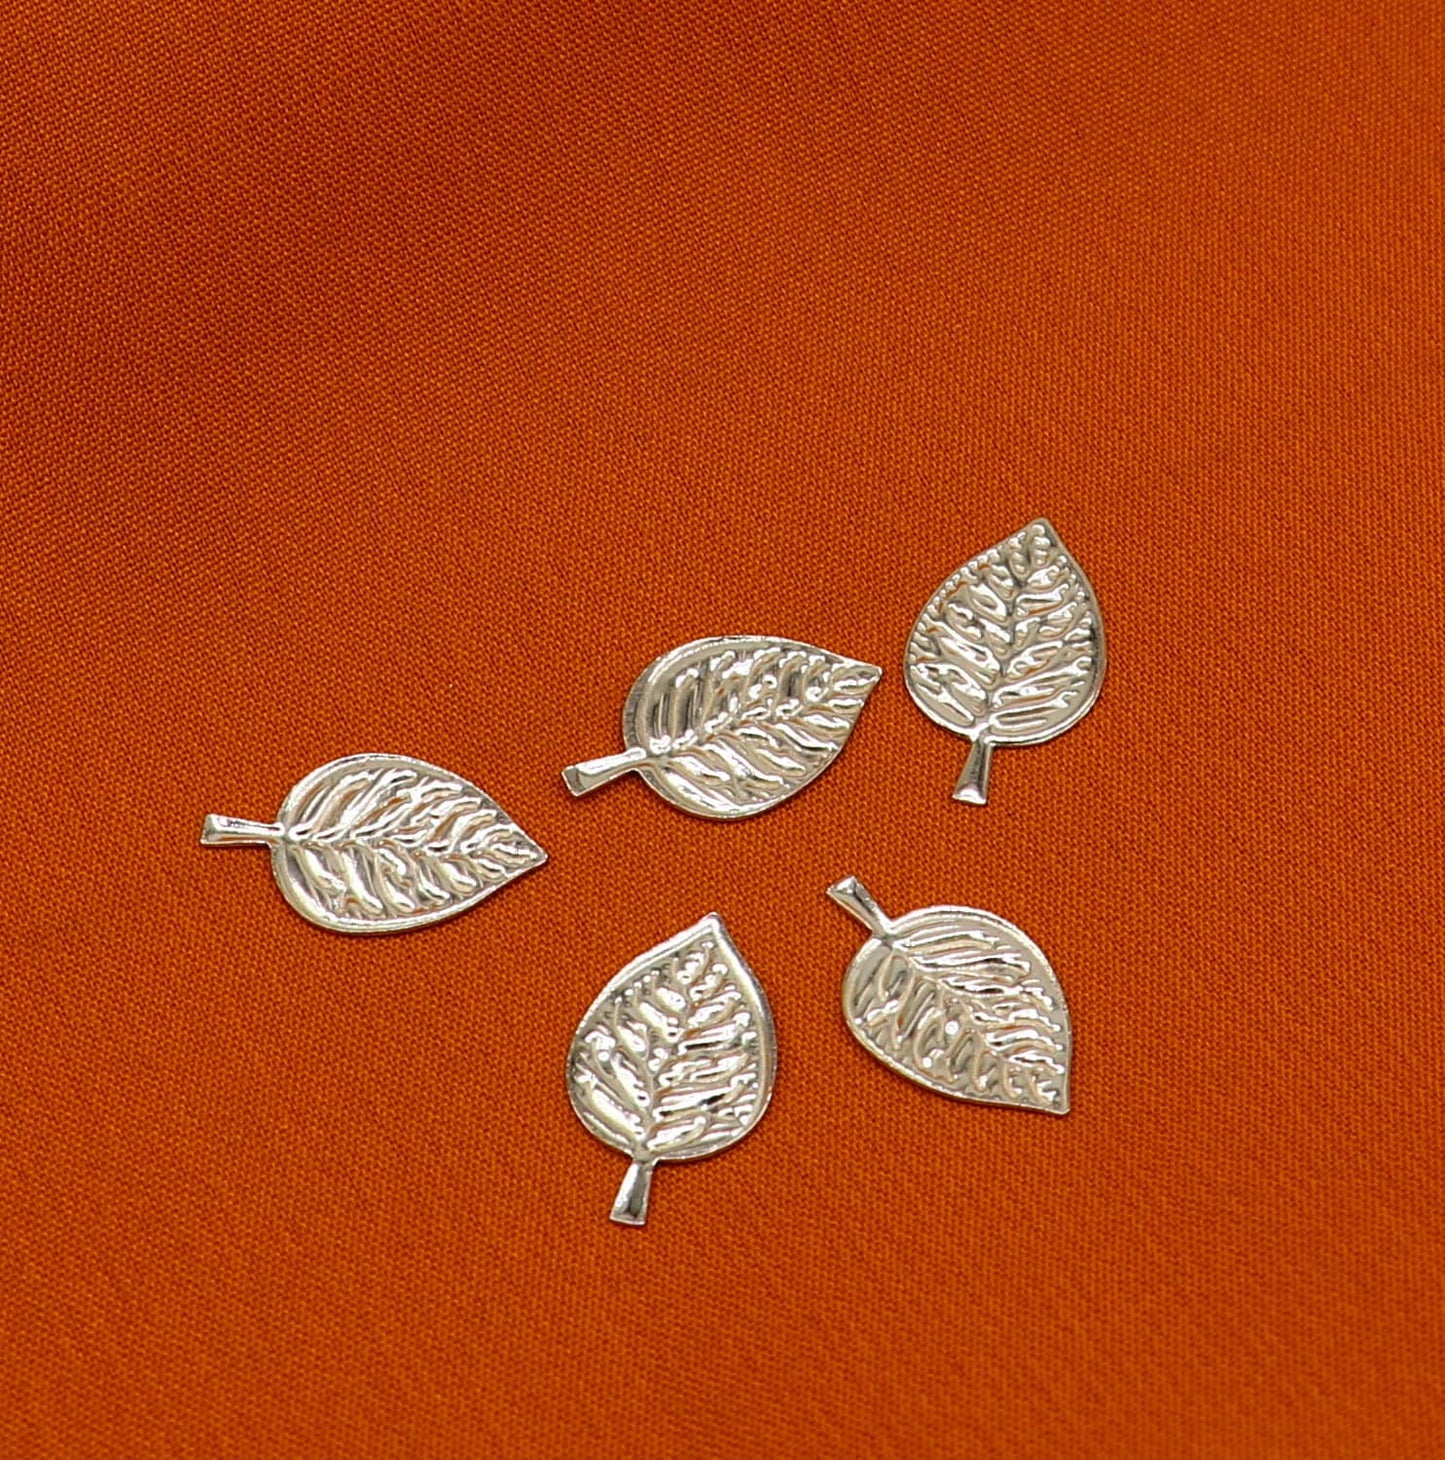 2cm 925 sterling silver handmade small betel leaf Paan leaf for worshipping offered to Lord Vishnu, Goddesses Laxmi and Lord Ganesh su1104 - TRIBAL ORNAMENTS